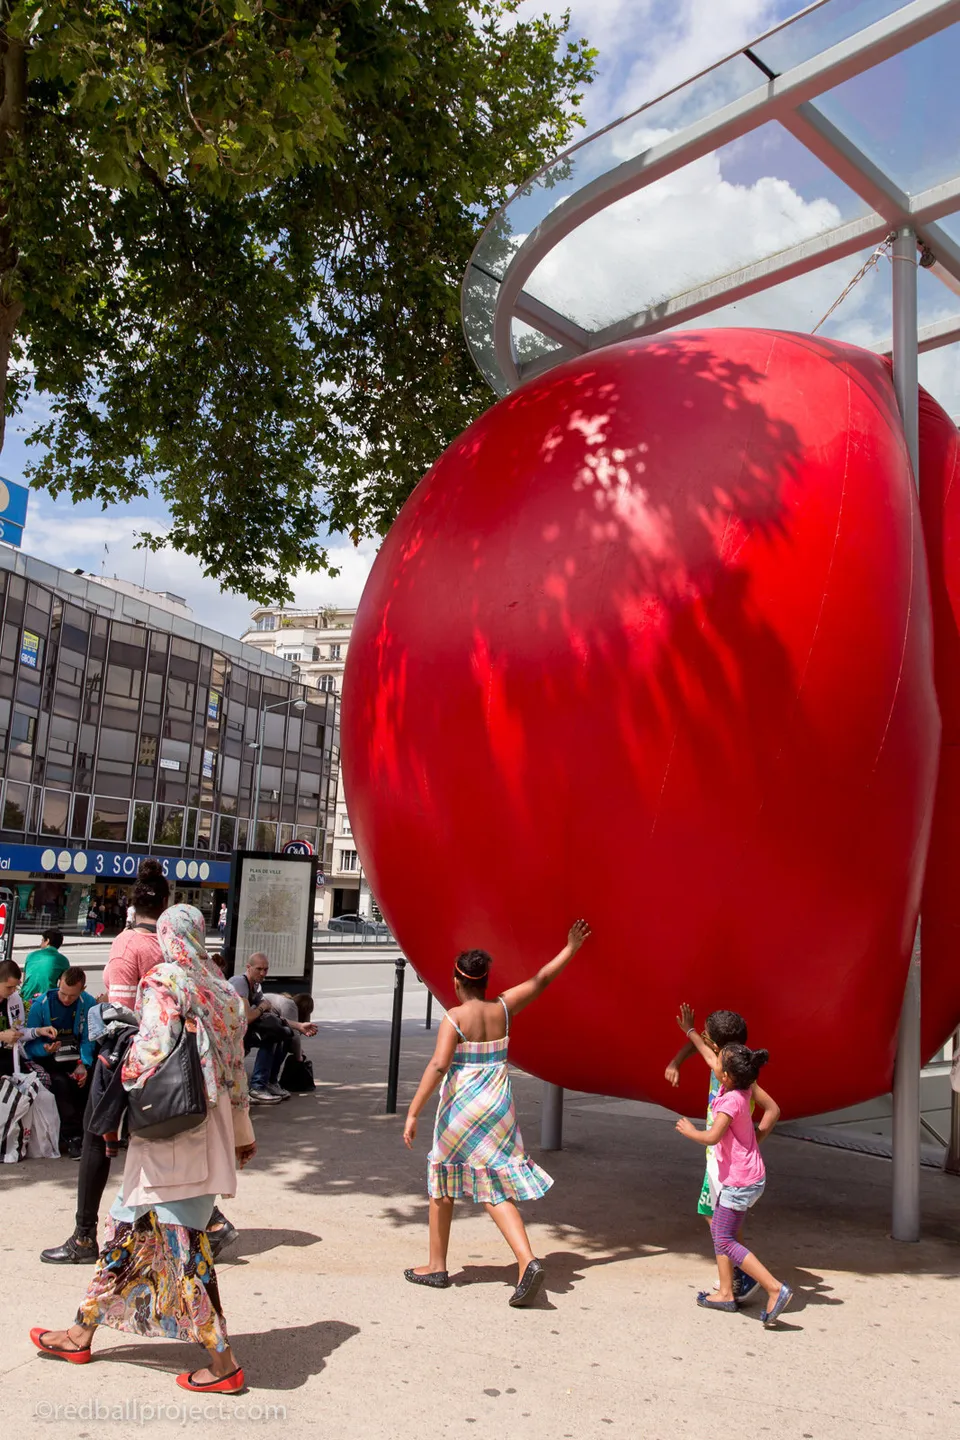 The Giant Red Ball That's Touring The Globe In The Name Of Art